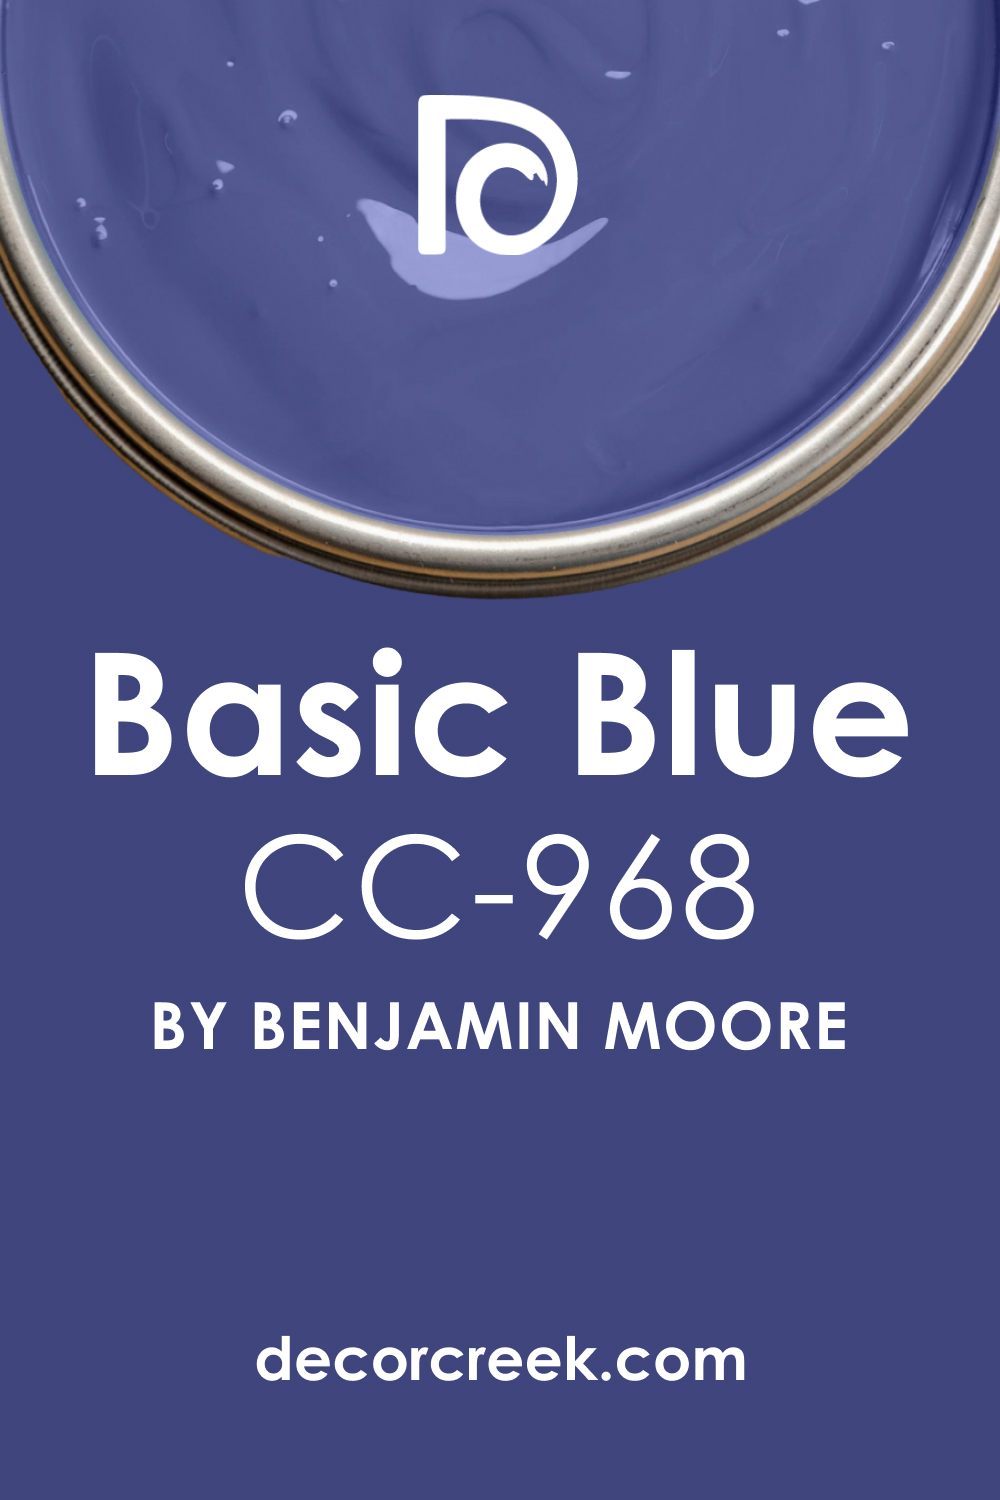 Basic Blue CC-968 Paint Color by Benjamin Moore